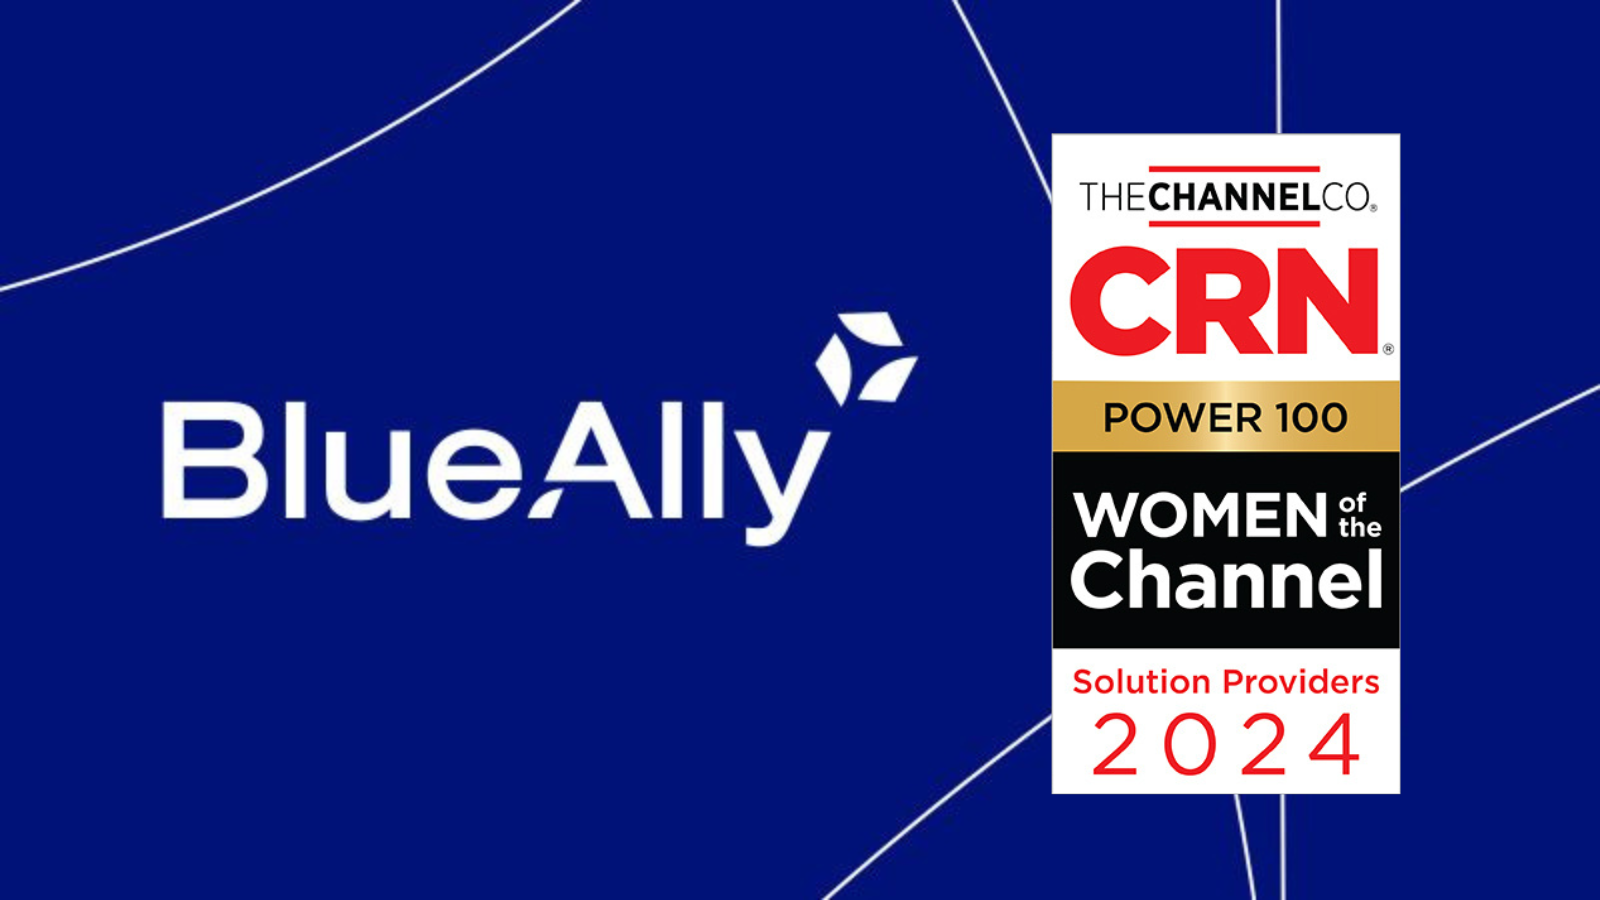 CRN Recognizes Patty Apple of BlueAlly on the 2024 Women of the Channel Power 100 Solution Provider List